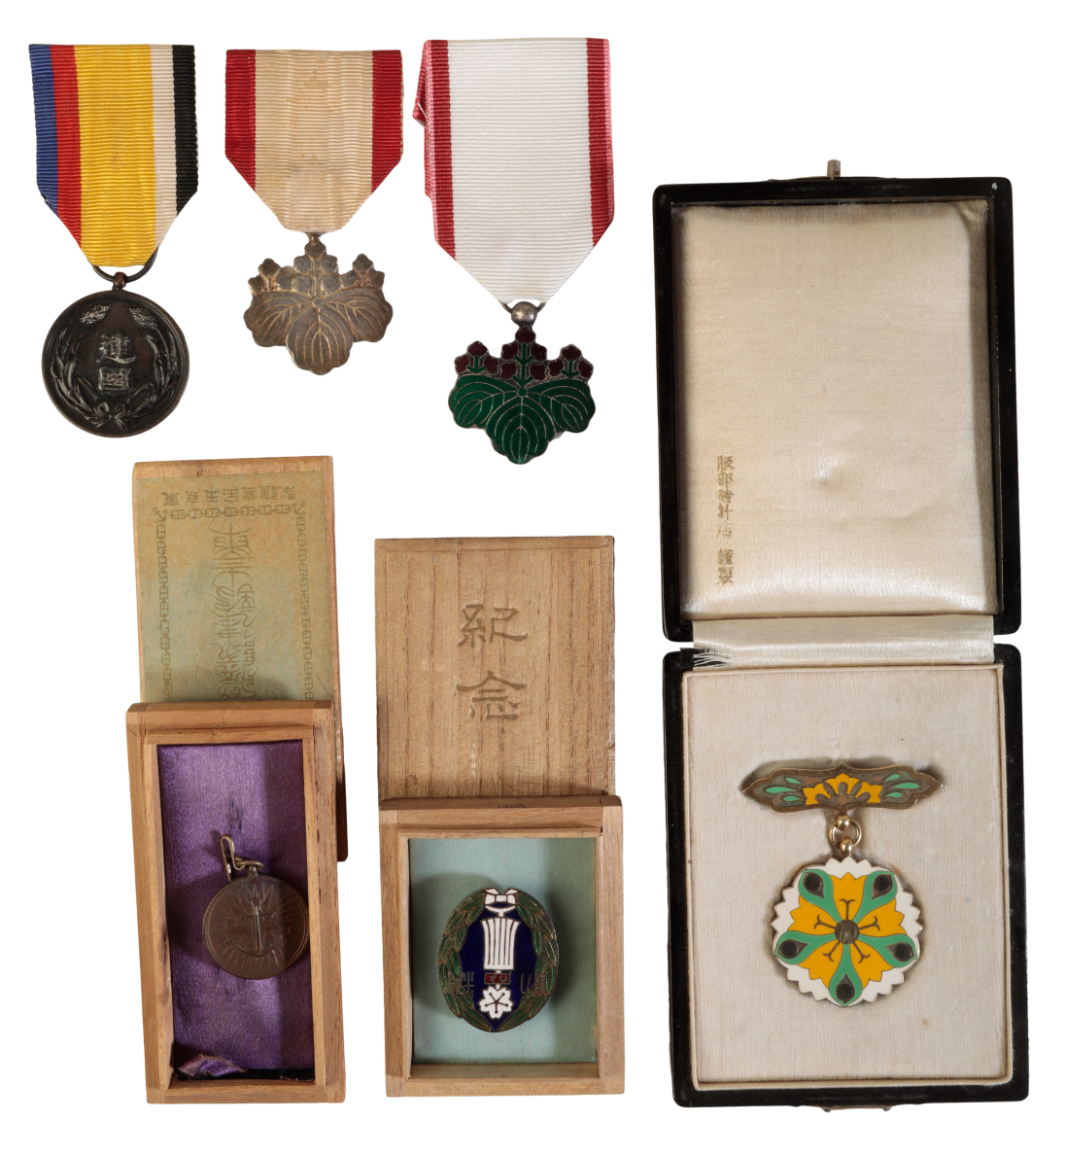 JAPAN. SIX ORDERS, MEDALS AND BADGES